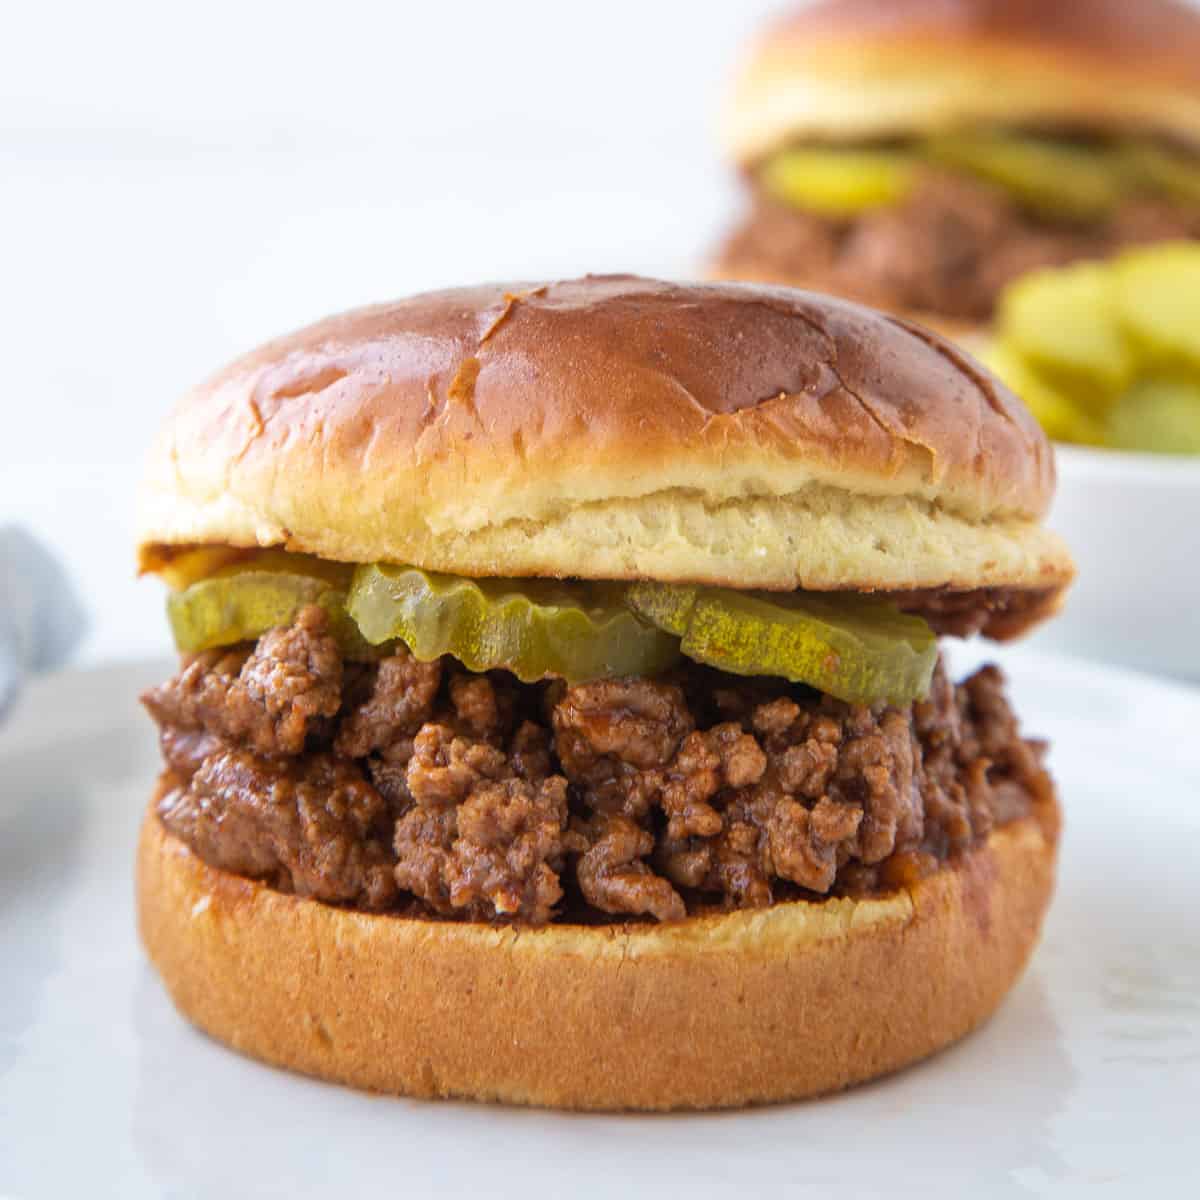 old fashioned sloppy joes meat on a brioche bun with pickles.